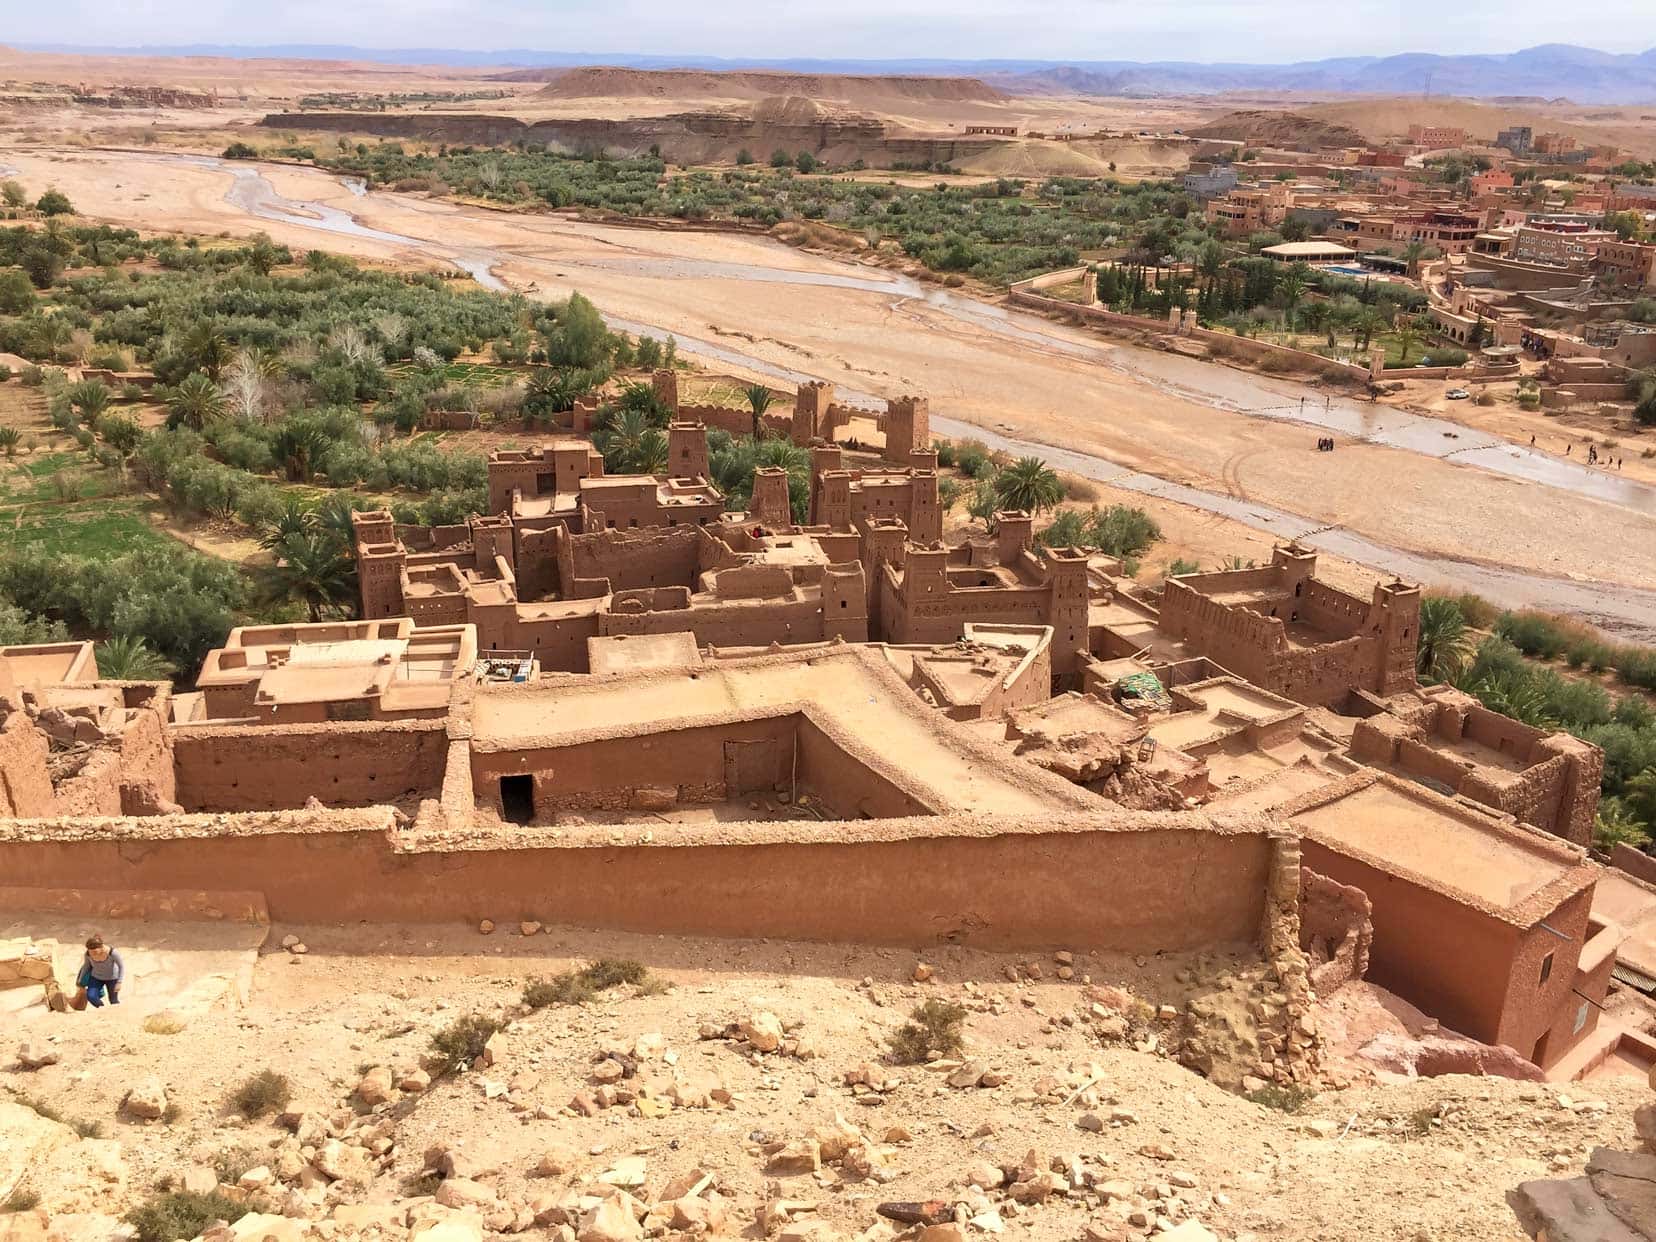 view-from-top of Ait Benhaddou